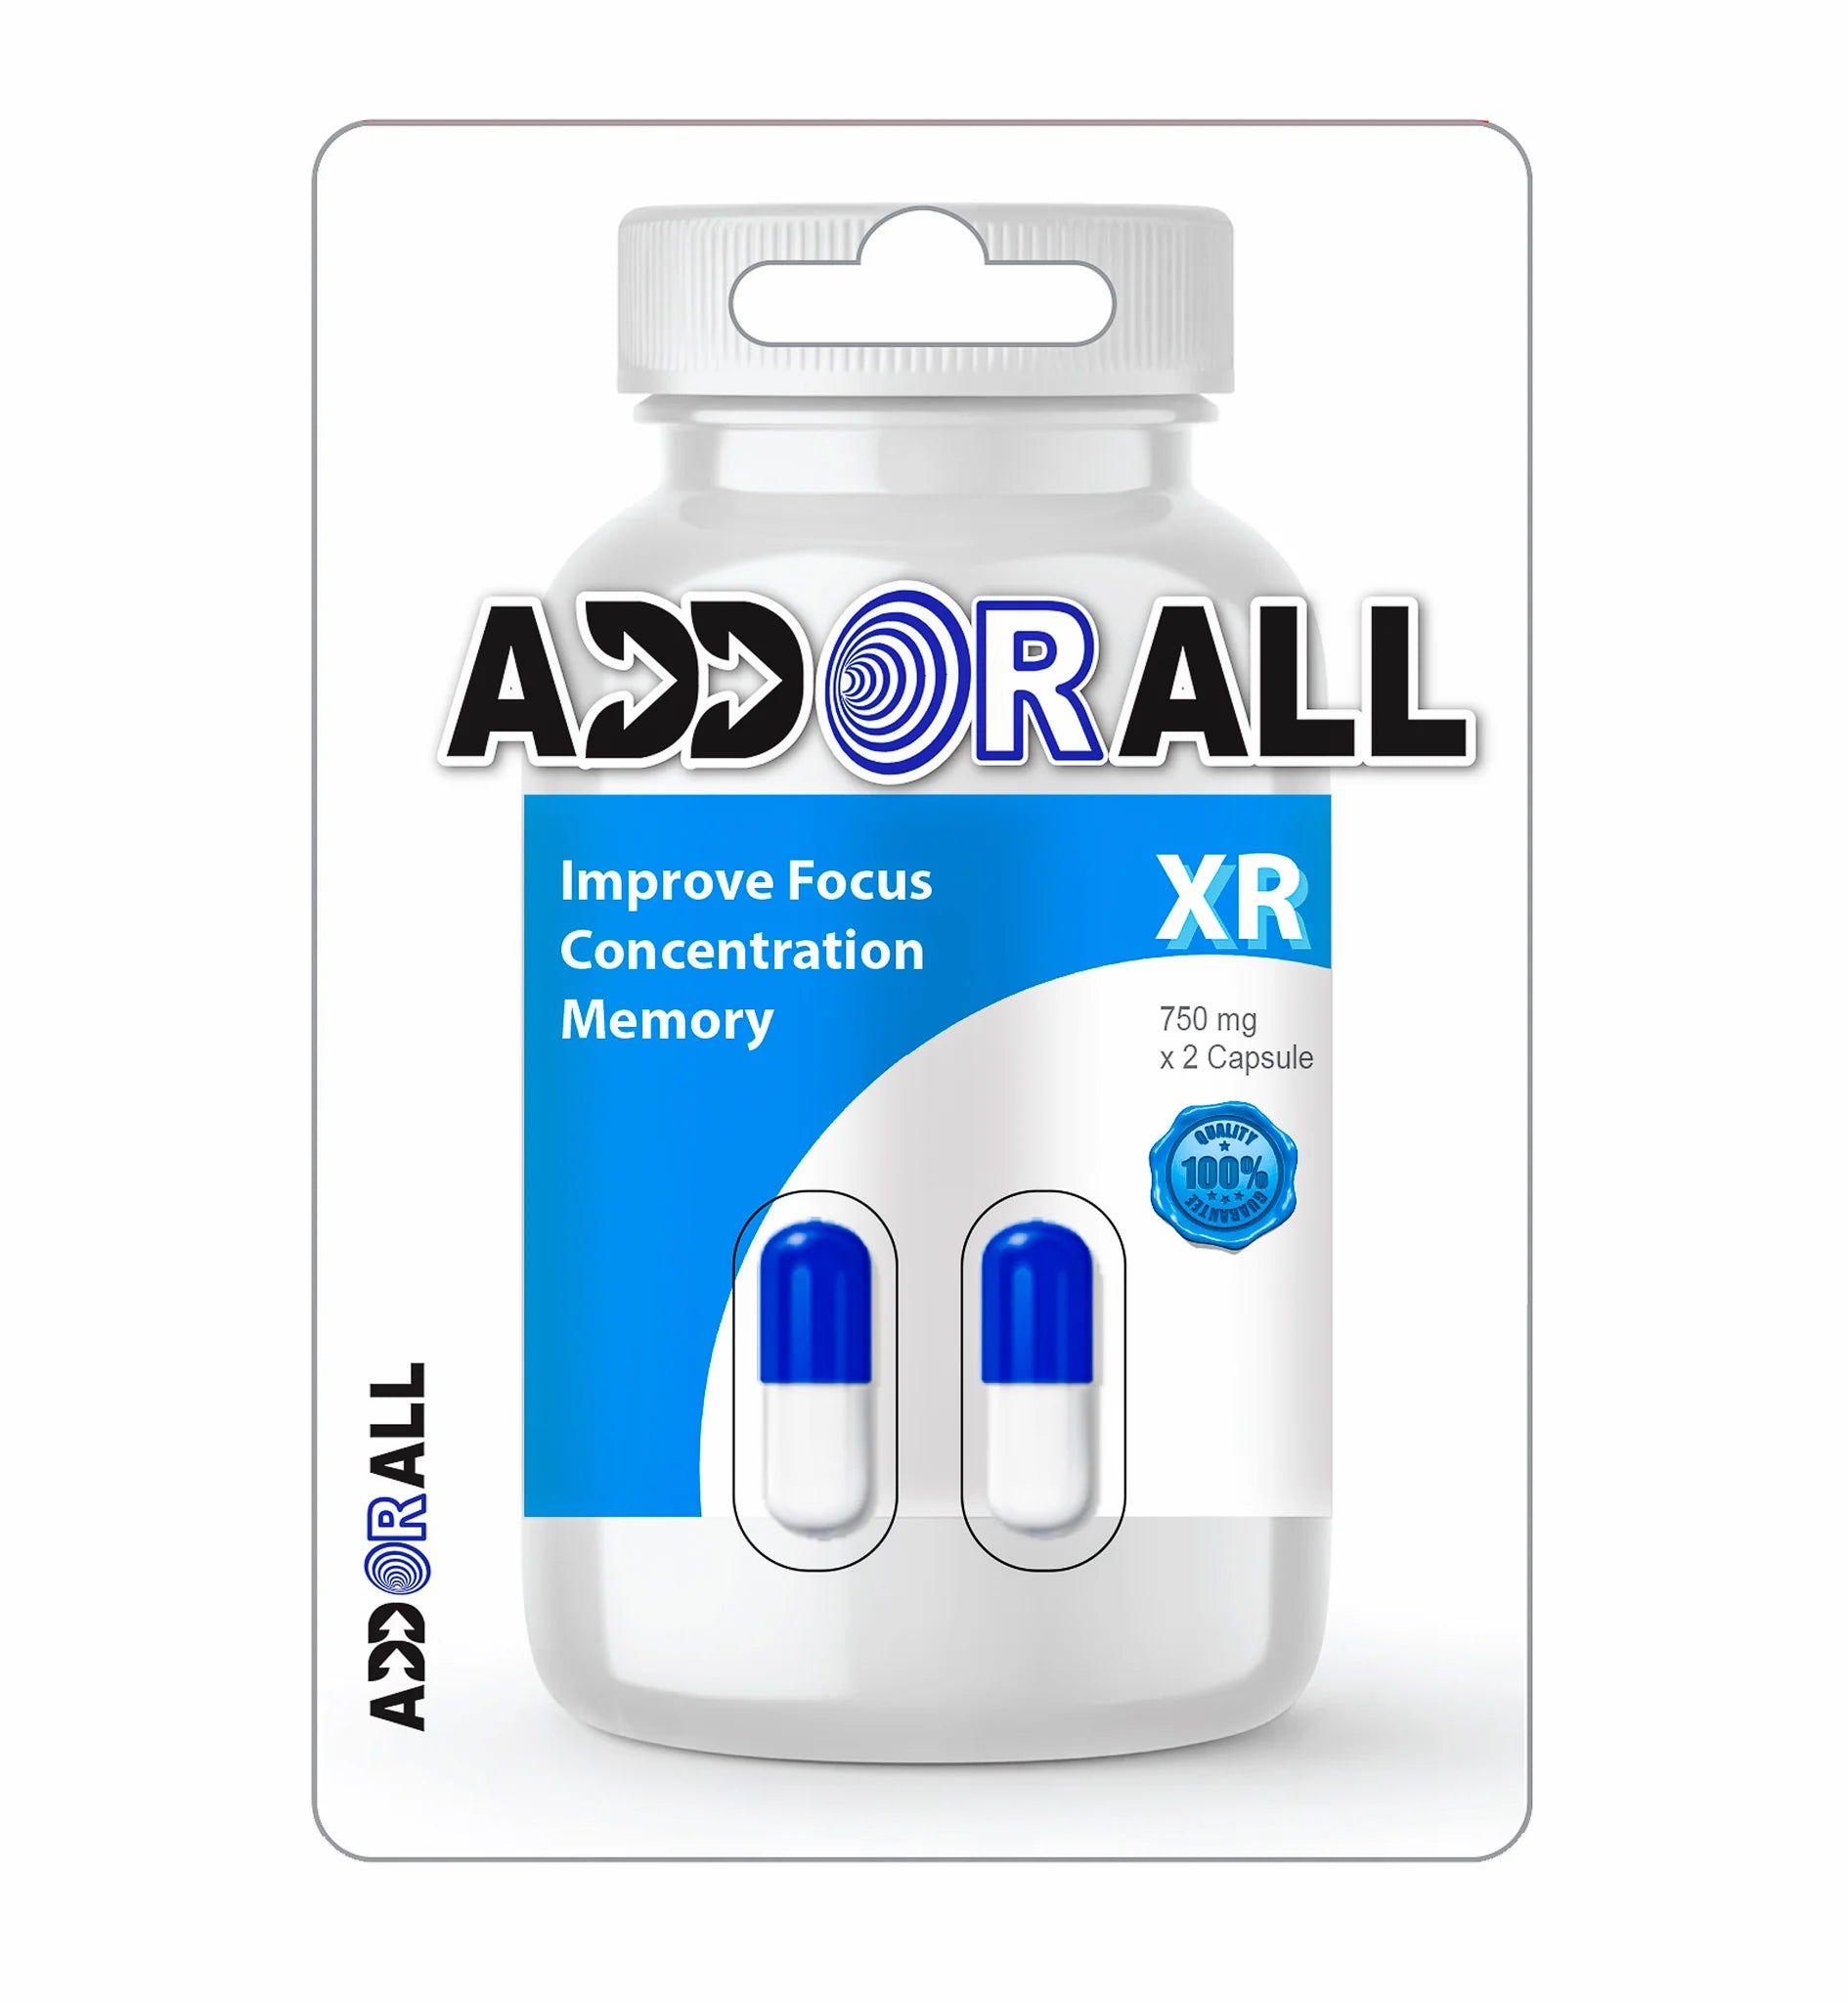 ADDORALL 3 PACK (6 CAPSULES)